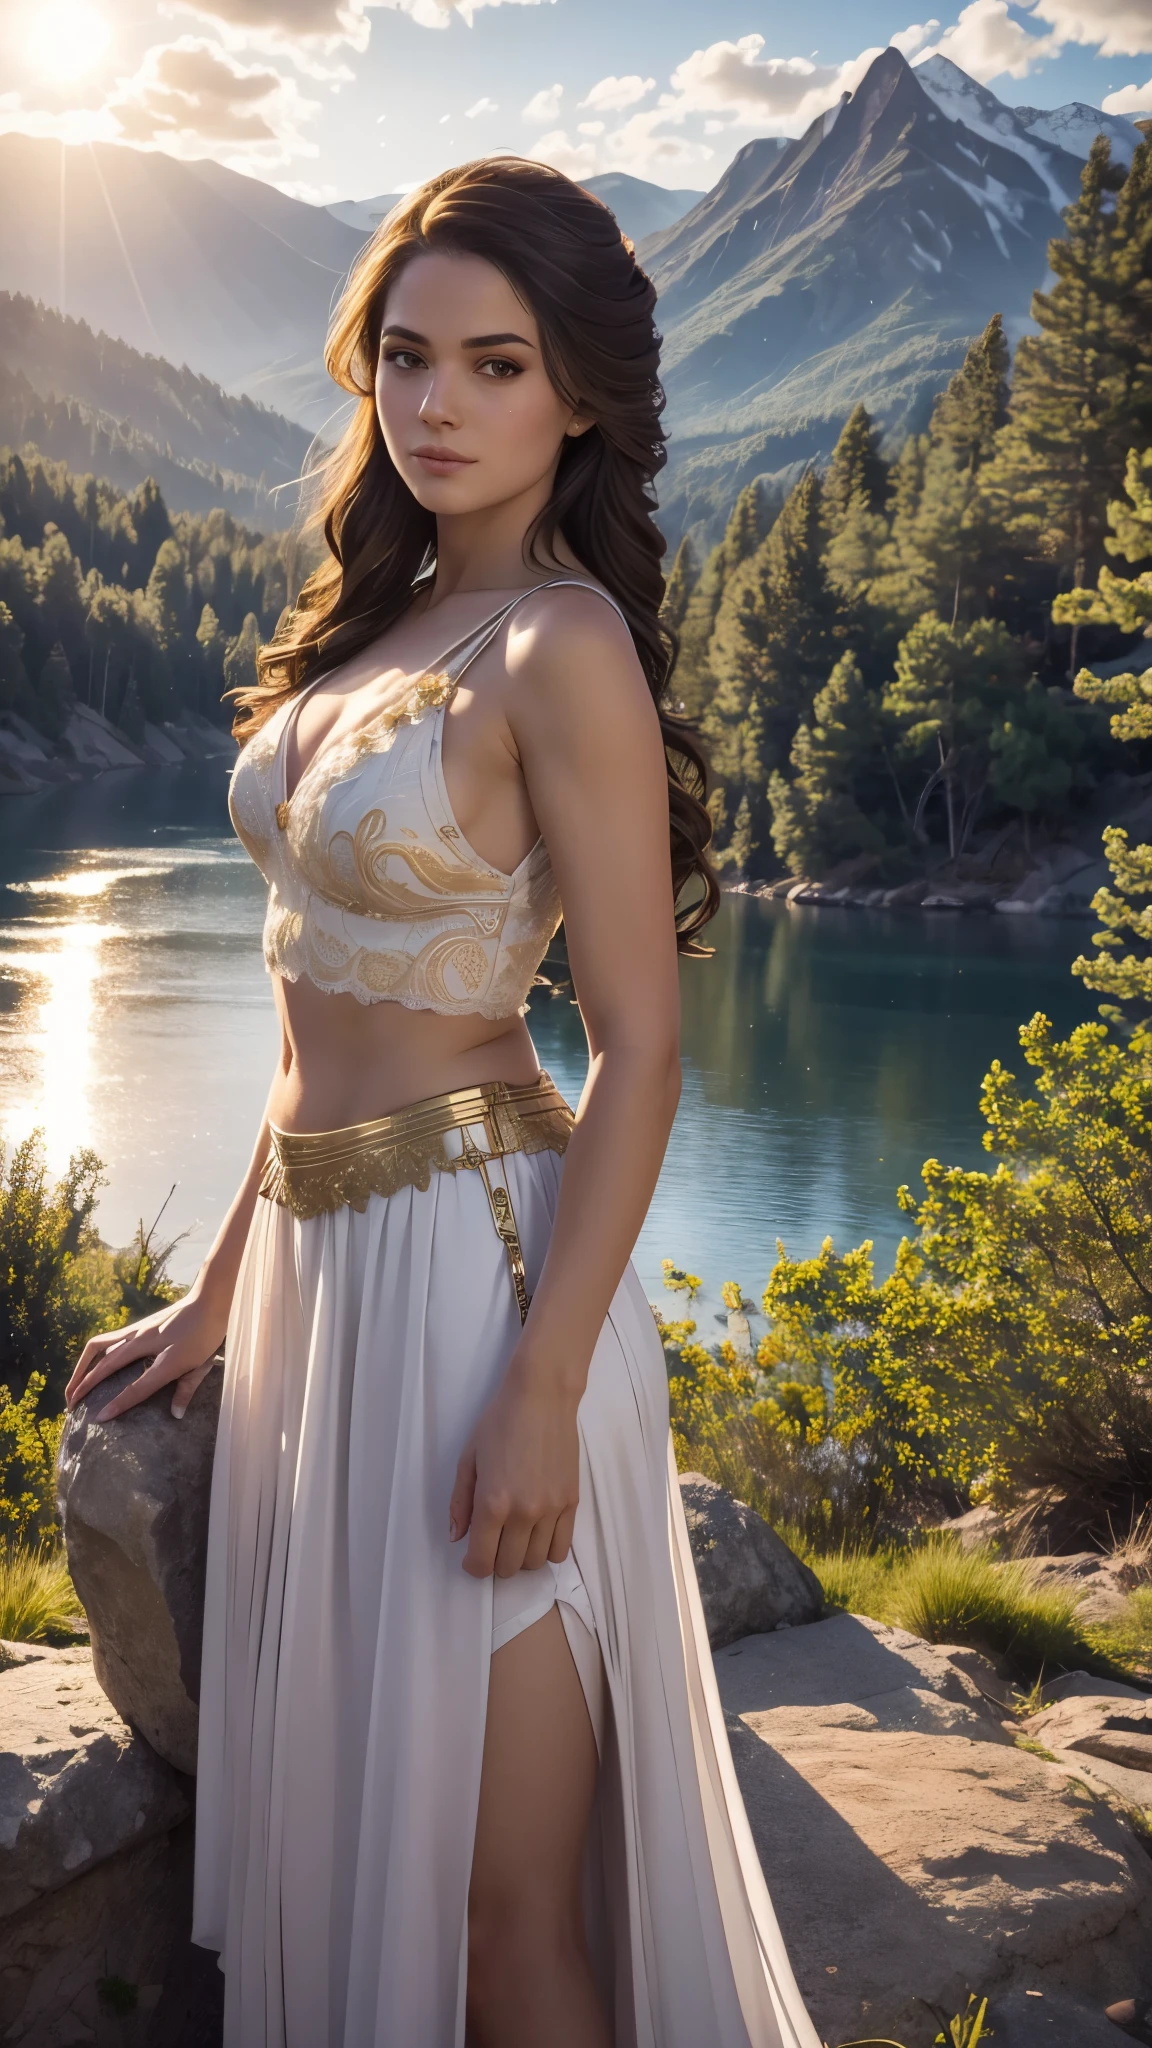 1 girl, happy expression, charming eyes, straight long hair, flowing skirt, big, looking at the sun, calm posture, porcelain-like skin, subtle blush, crystal pendant BREAK Golden Hour, (edge lighting): 1.2, cool colors, sun flare, soft shadows, bright colors, painting effects, fantastic atmosphere BREAK Scenic lakes, distant mountains, pine trees, mountain tops, reflections, sunlit clouds, tranquil atmosphere, idyllic sunrise, Ultra detailed, official art, unified 8k wallpapers, zentangle, mandala